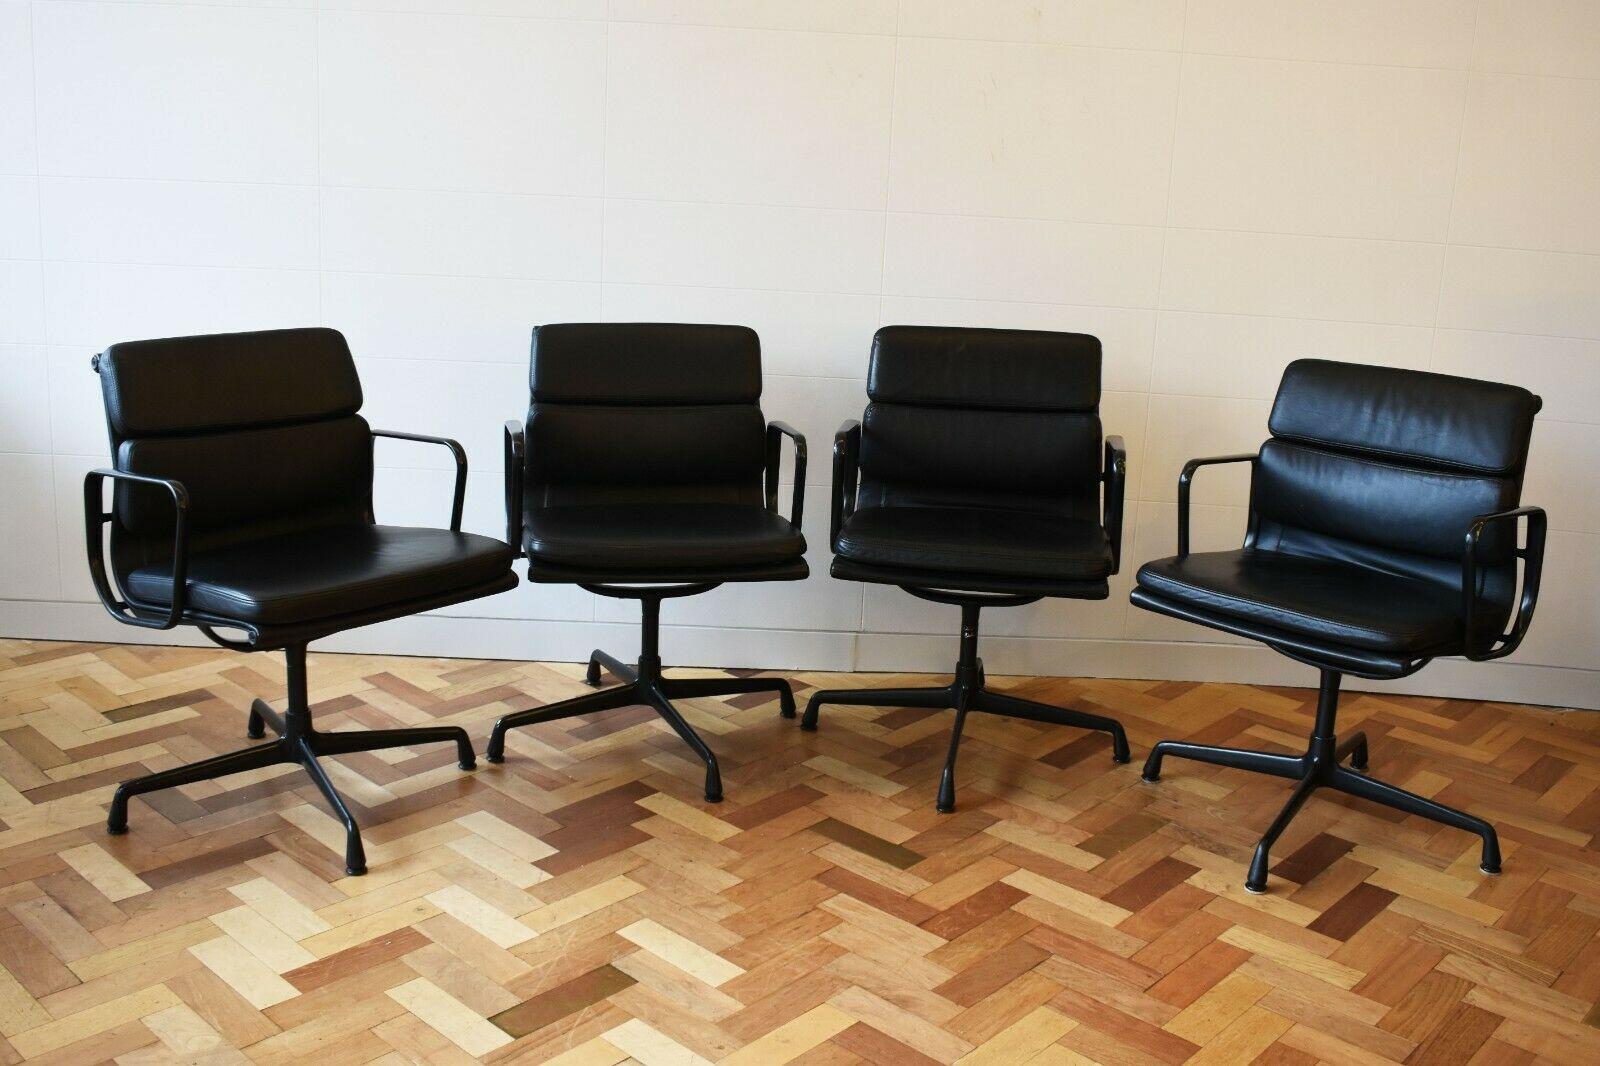 Late 20th Century Eames Model Ea208 Soft Pad Chairs for Vitra C.1980s /1990s in Black Leather